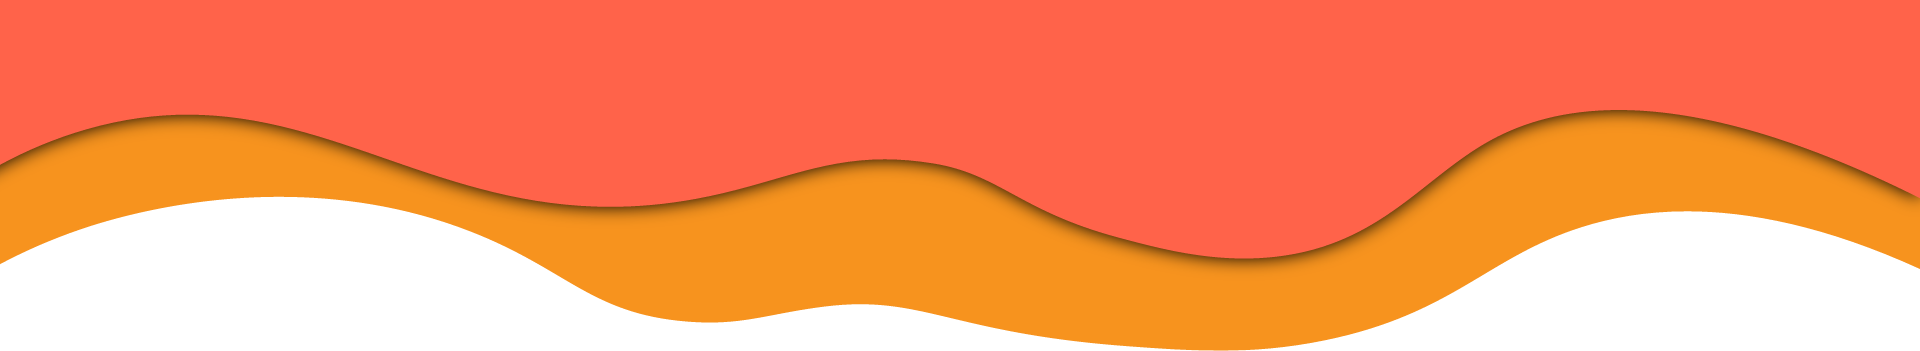 orange and yellow paper background for header